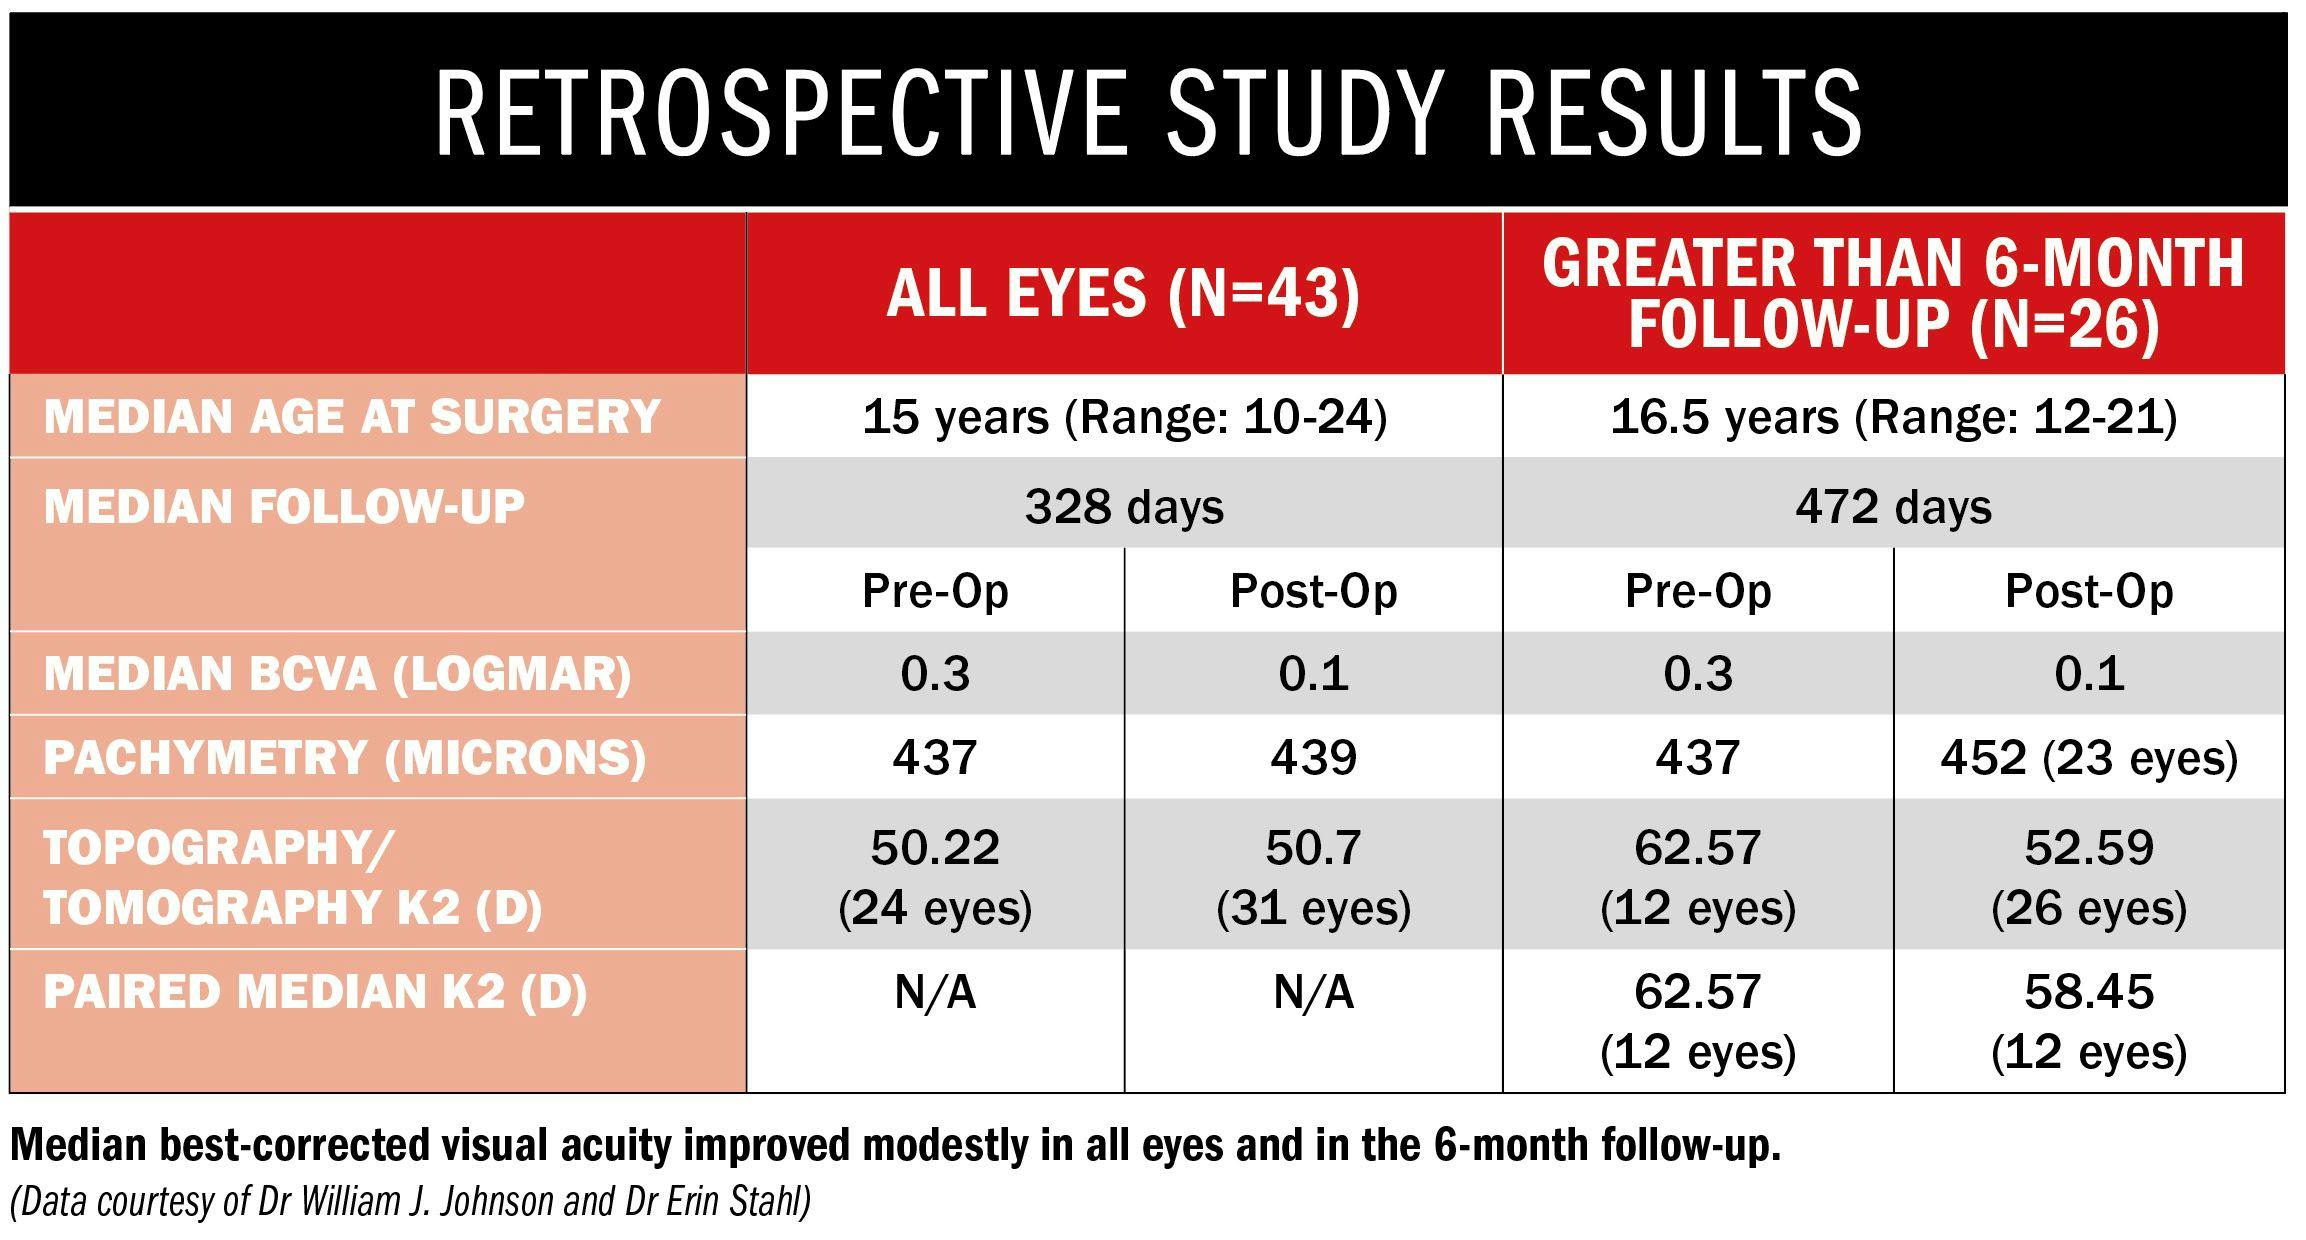 Chart of retrospective study results showing median best-corrected visual acuity